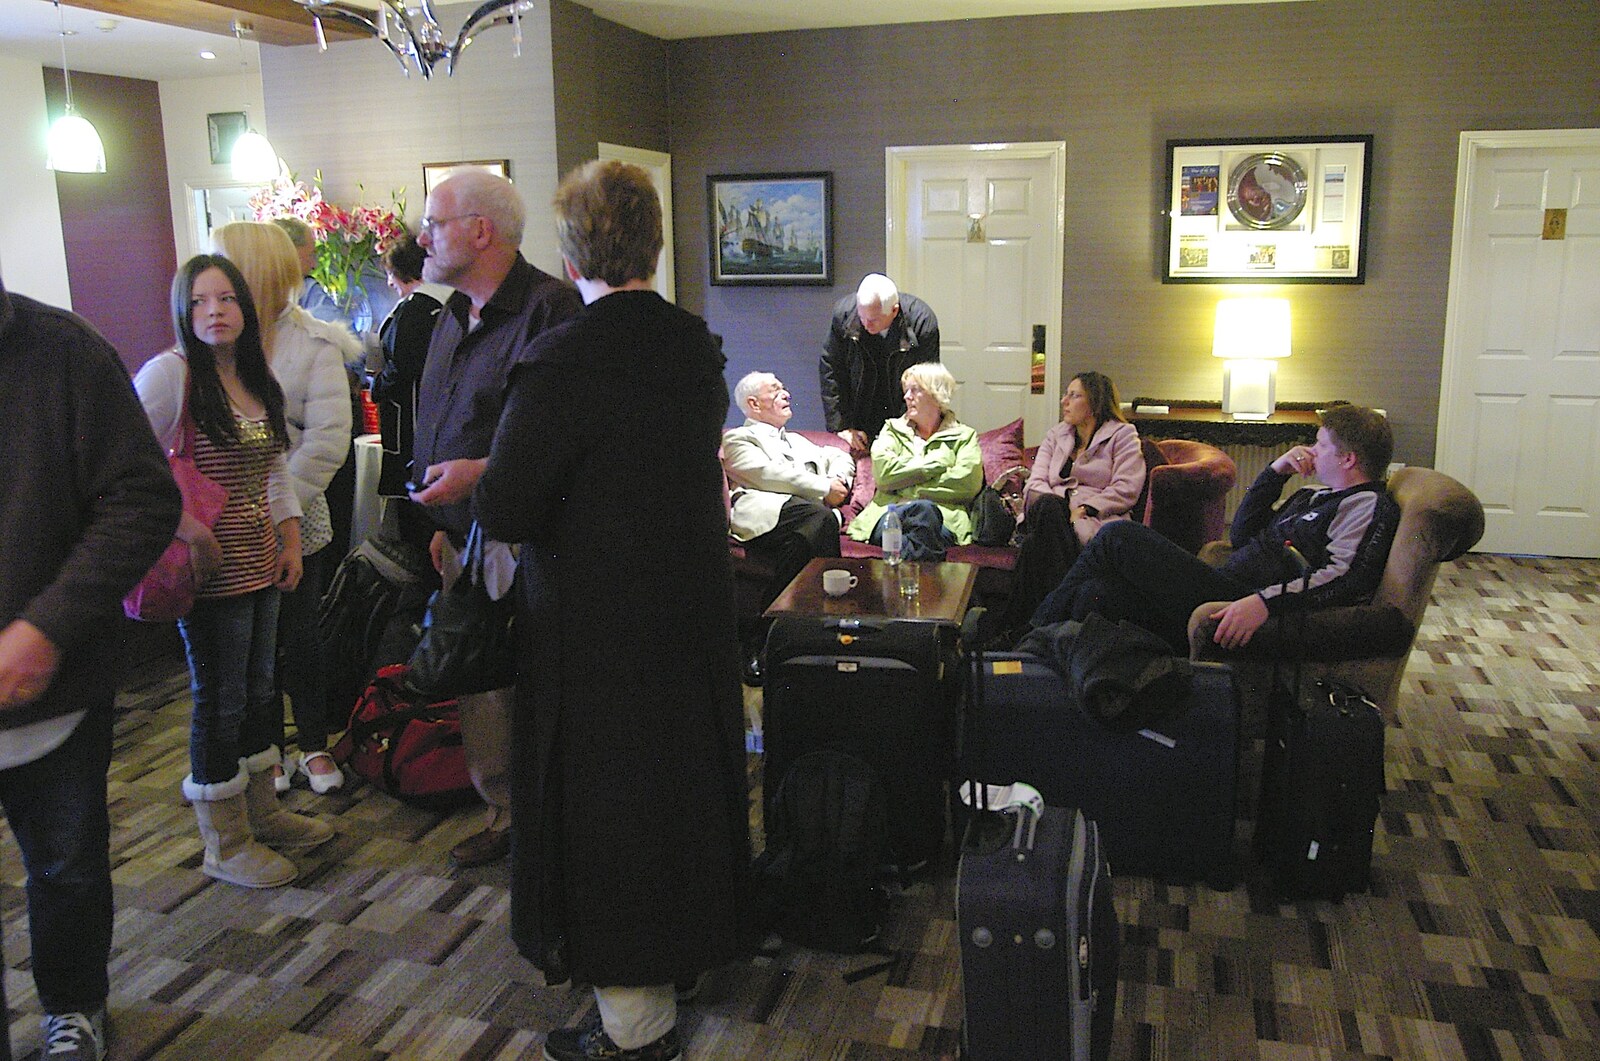 Guests gathered in the hotel's reception from Caroline and Chris's Wedding, Spanish Point, County Clare, Ireland - 26th October 2006